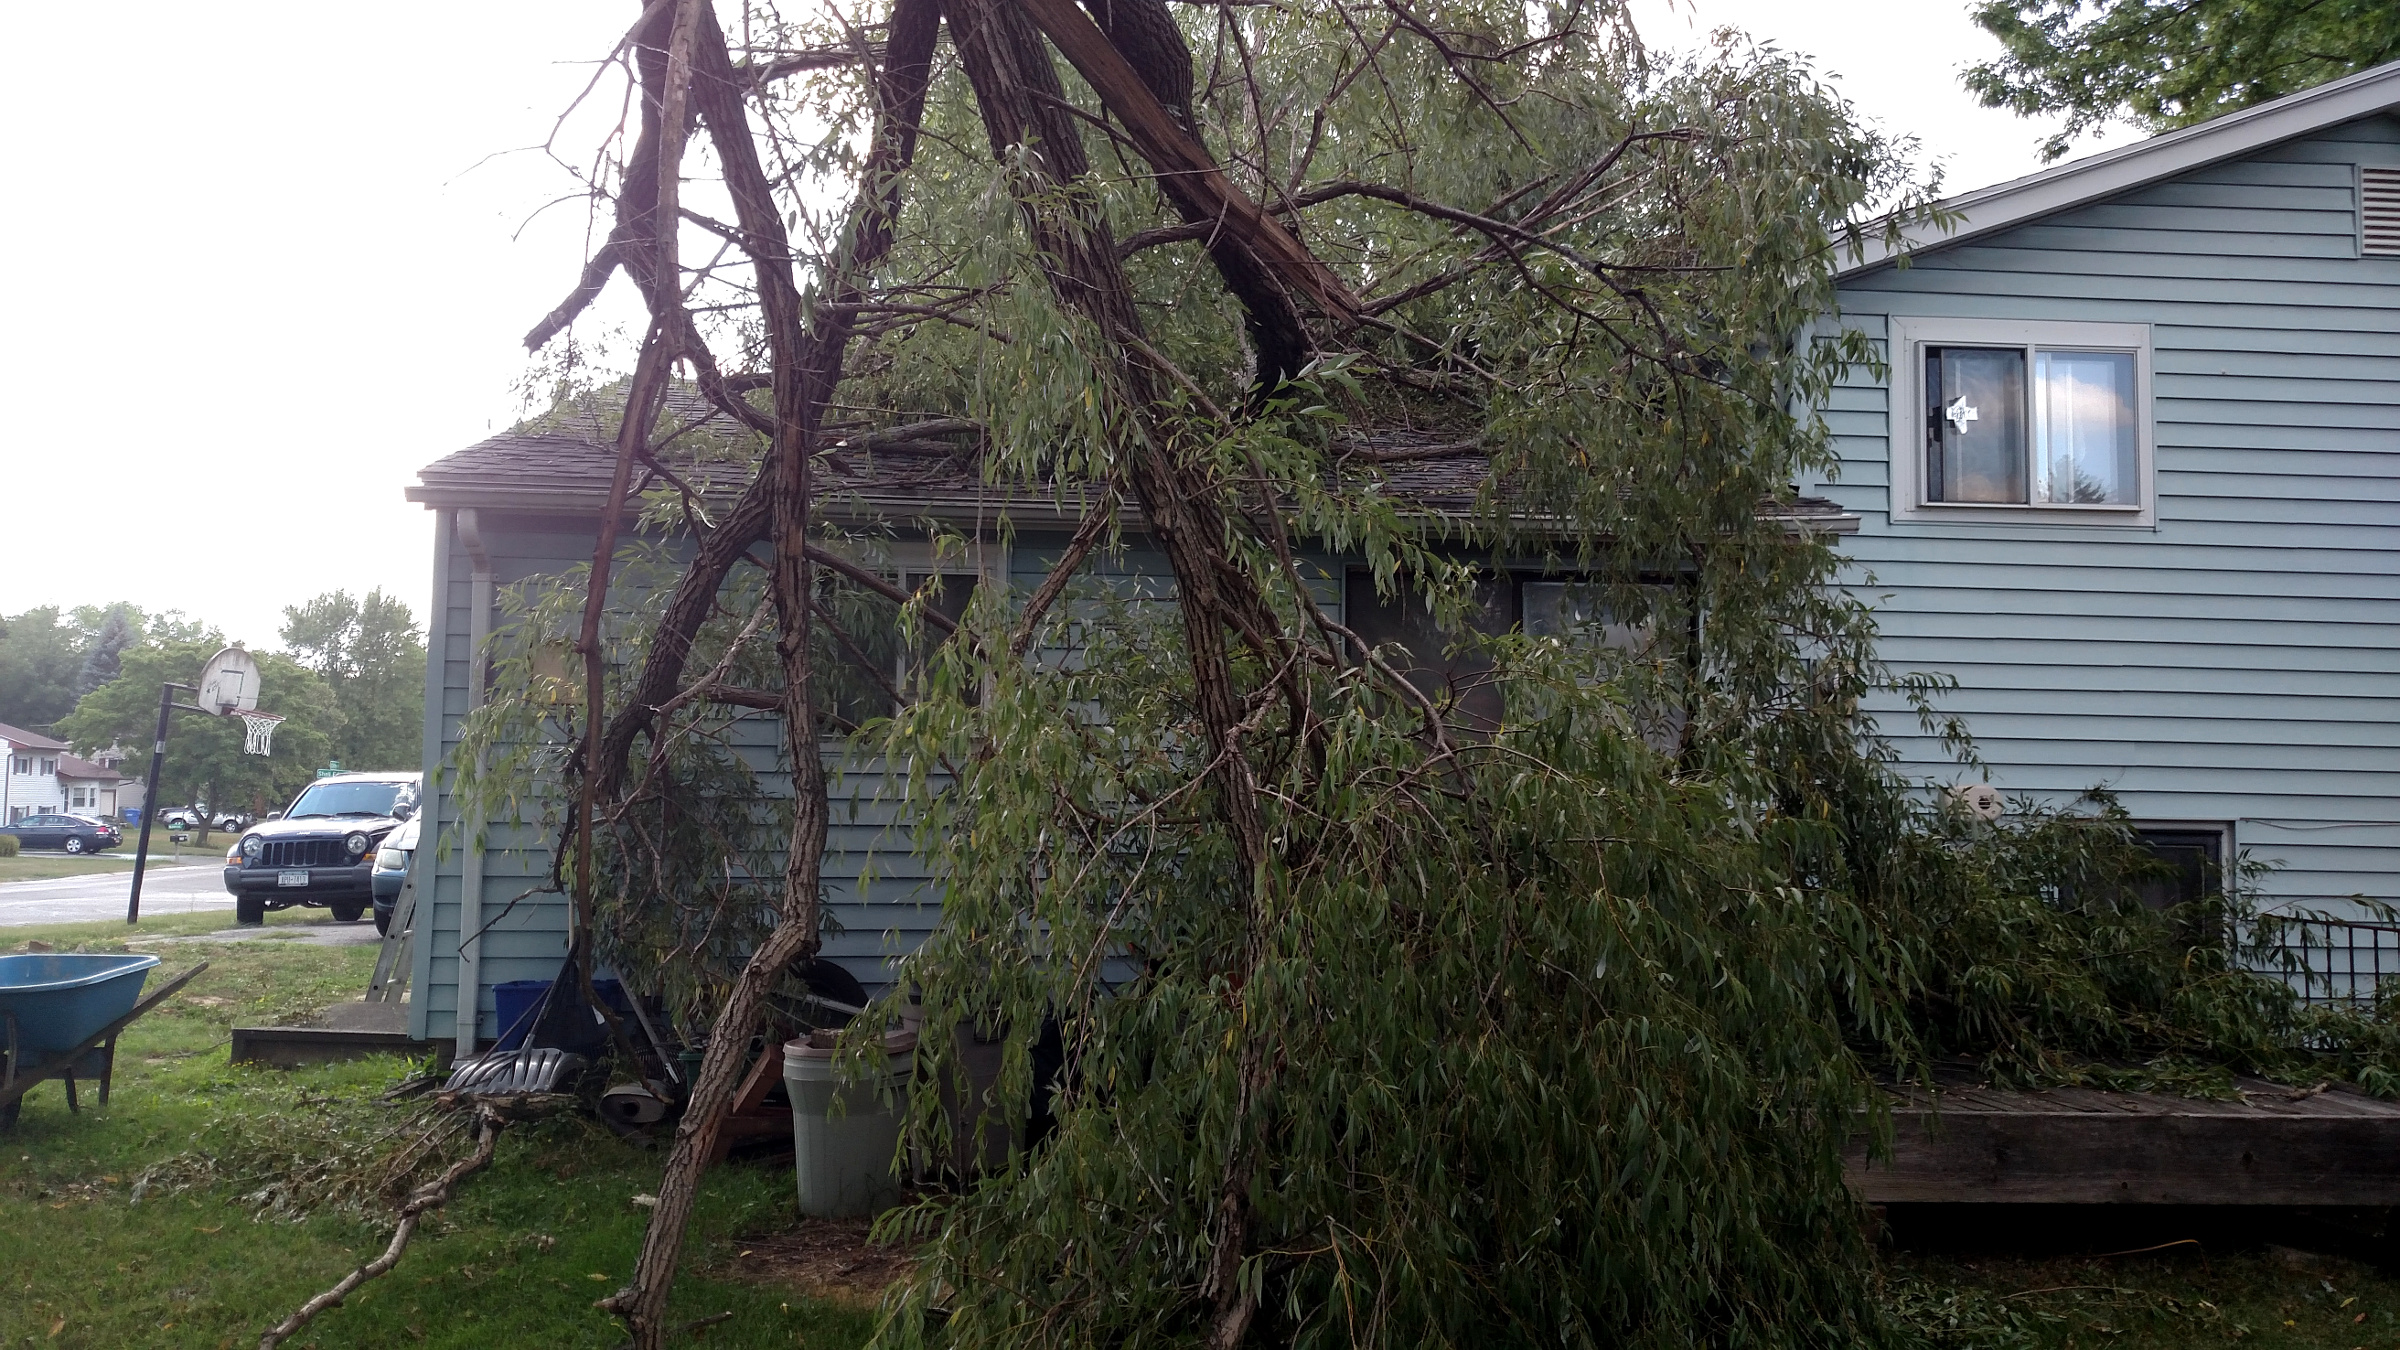 ArborScaper Tree & Landscape - Complete Tree Services for Storm Damage in Rochester NY - ArborScaperTree.com